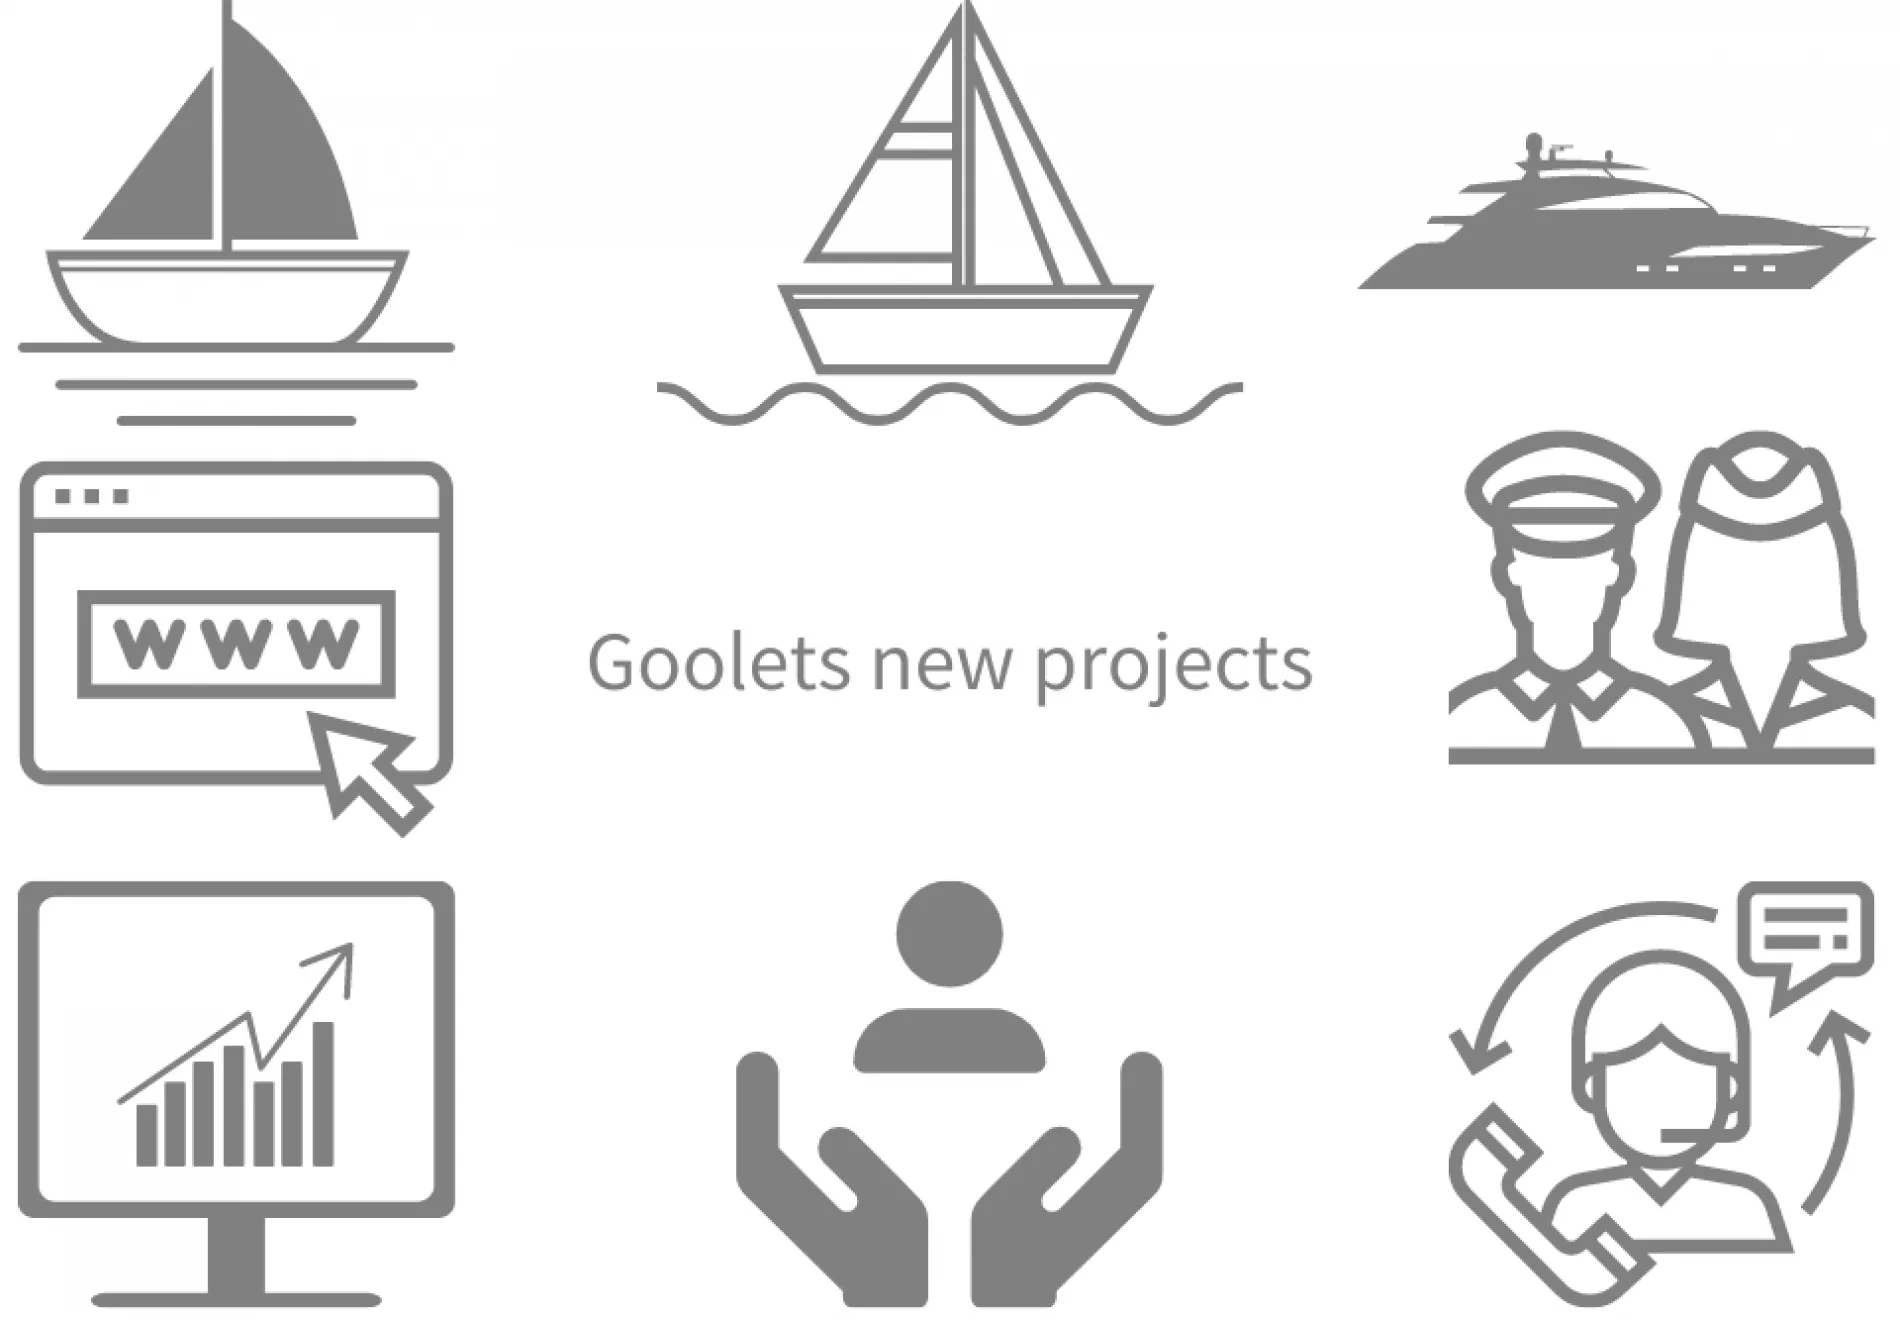 Goolets new projects